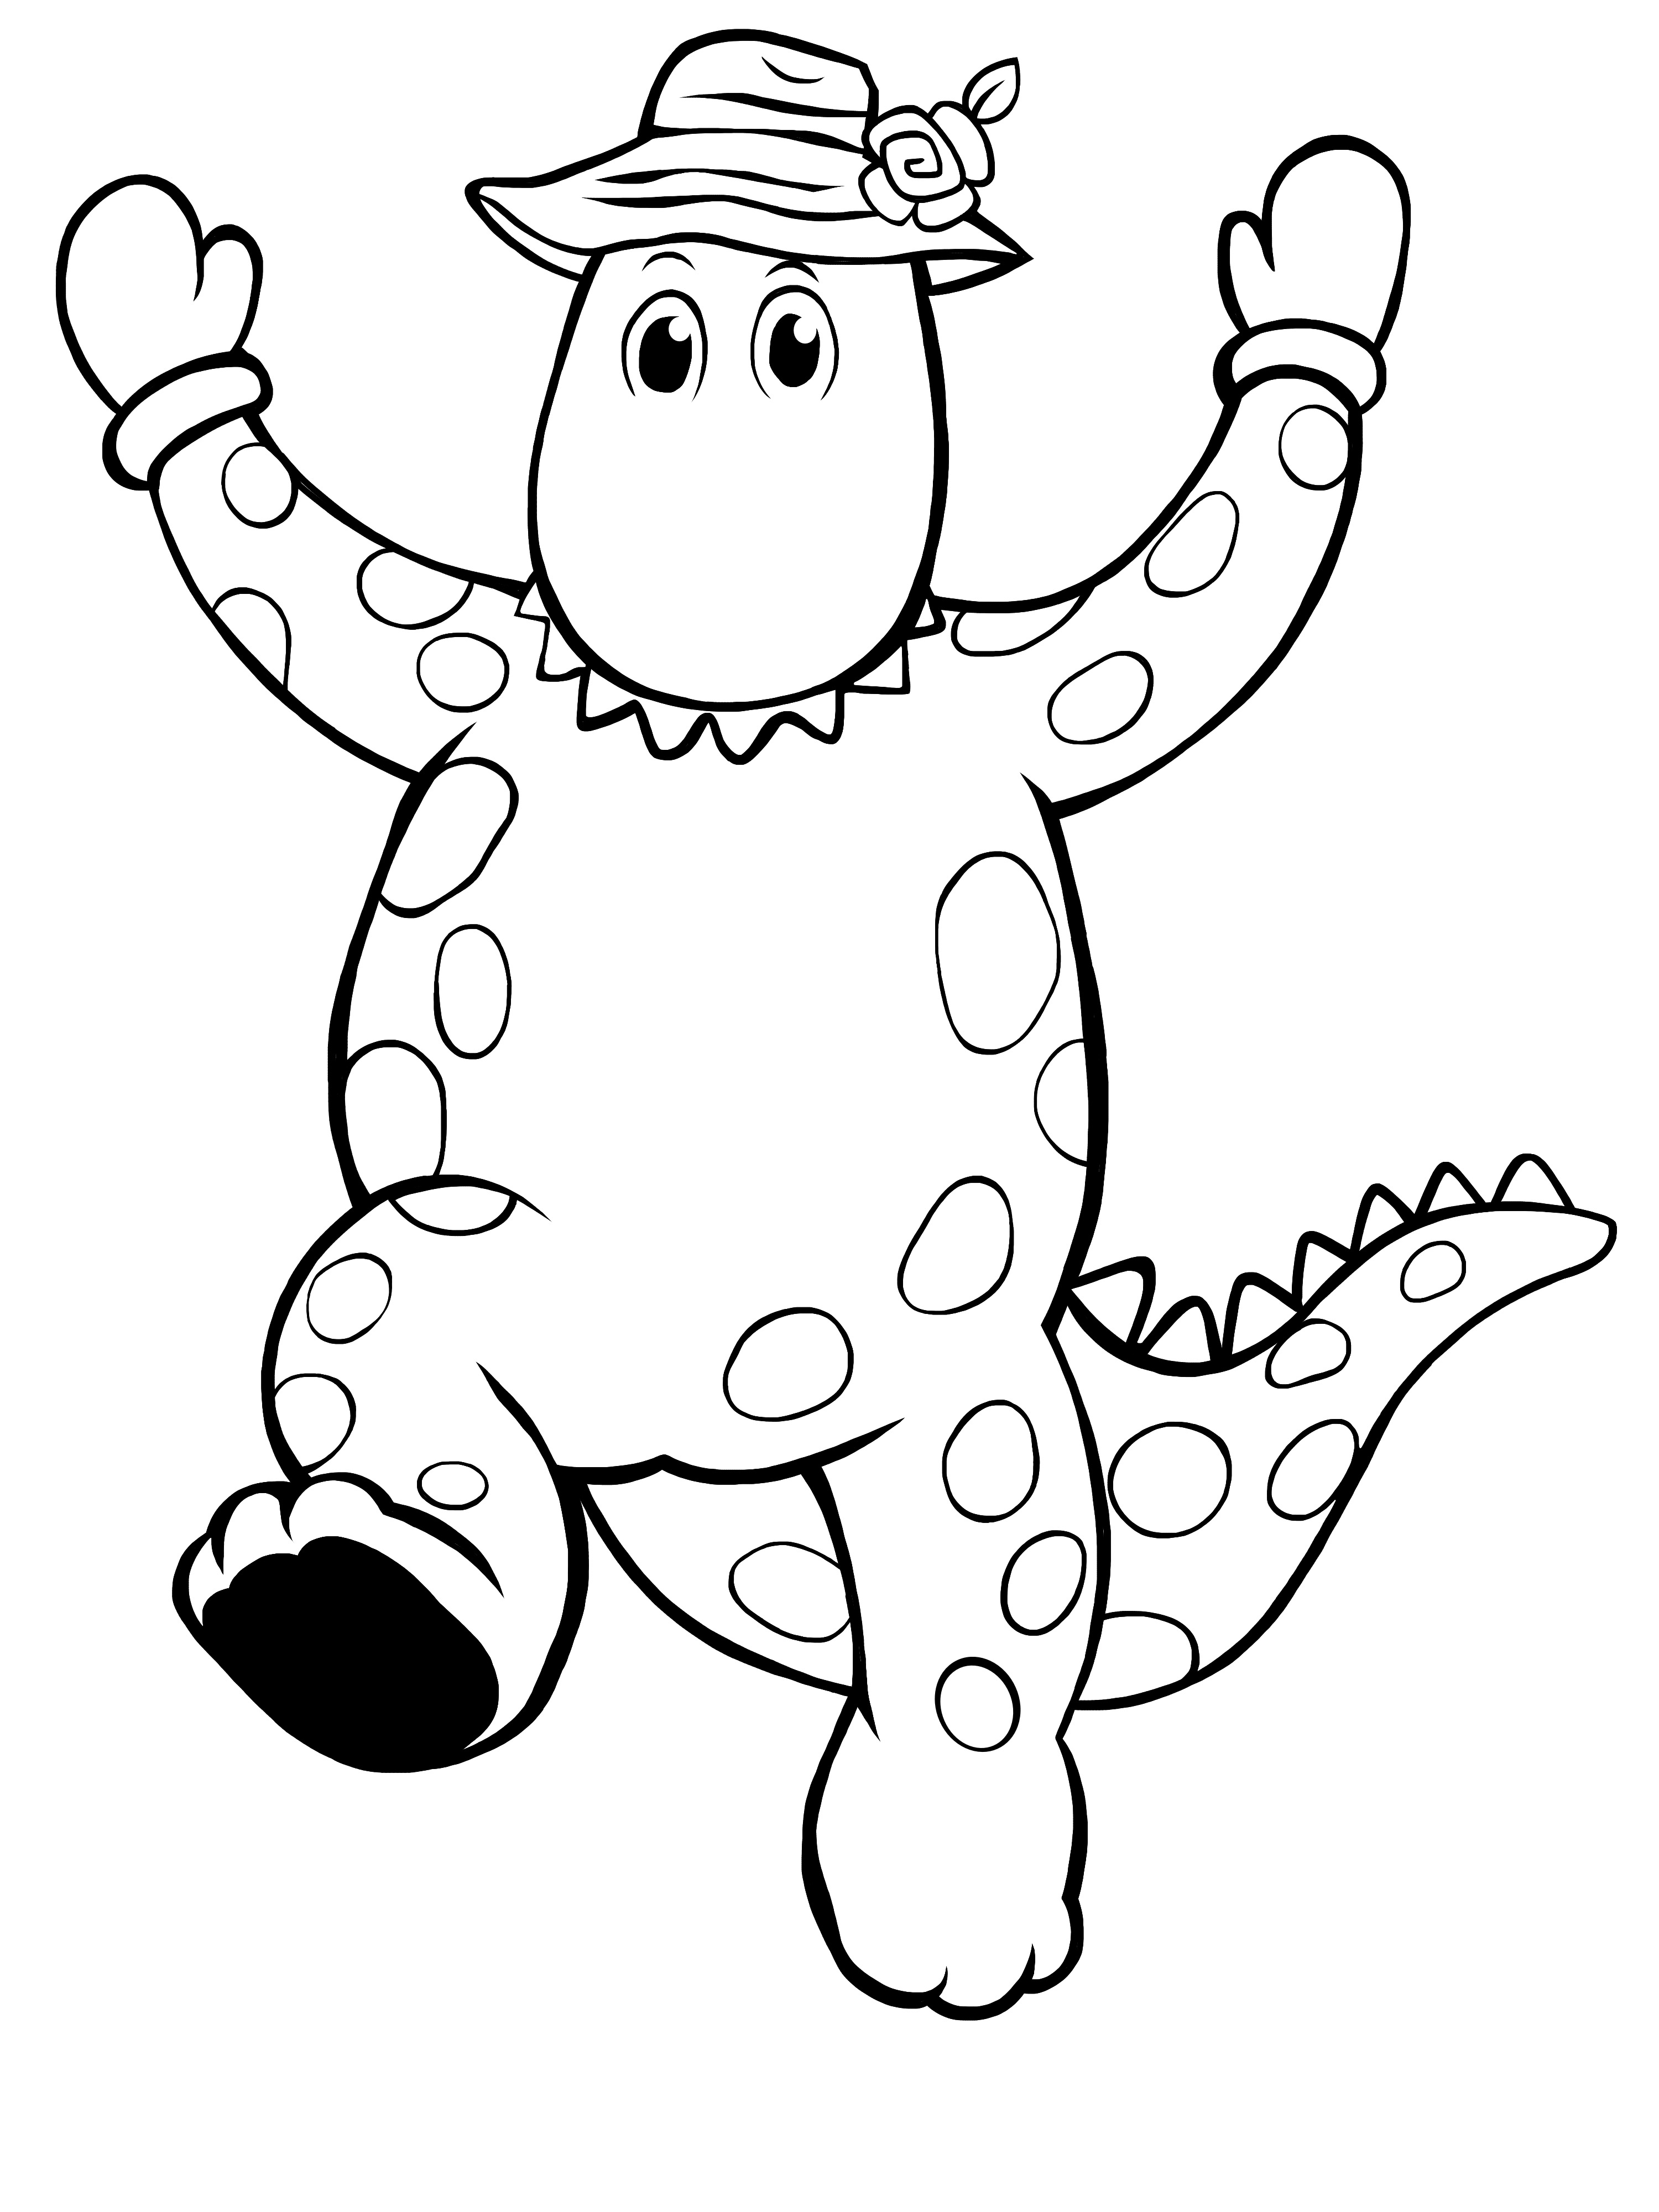 Dorothy the Dinosaur Coloring Page by seanscreations1 on DeviantArt